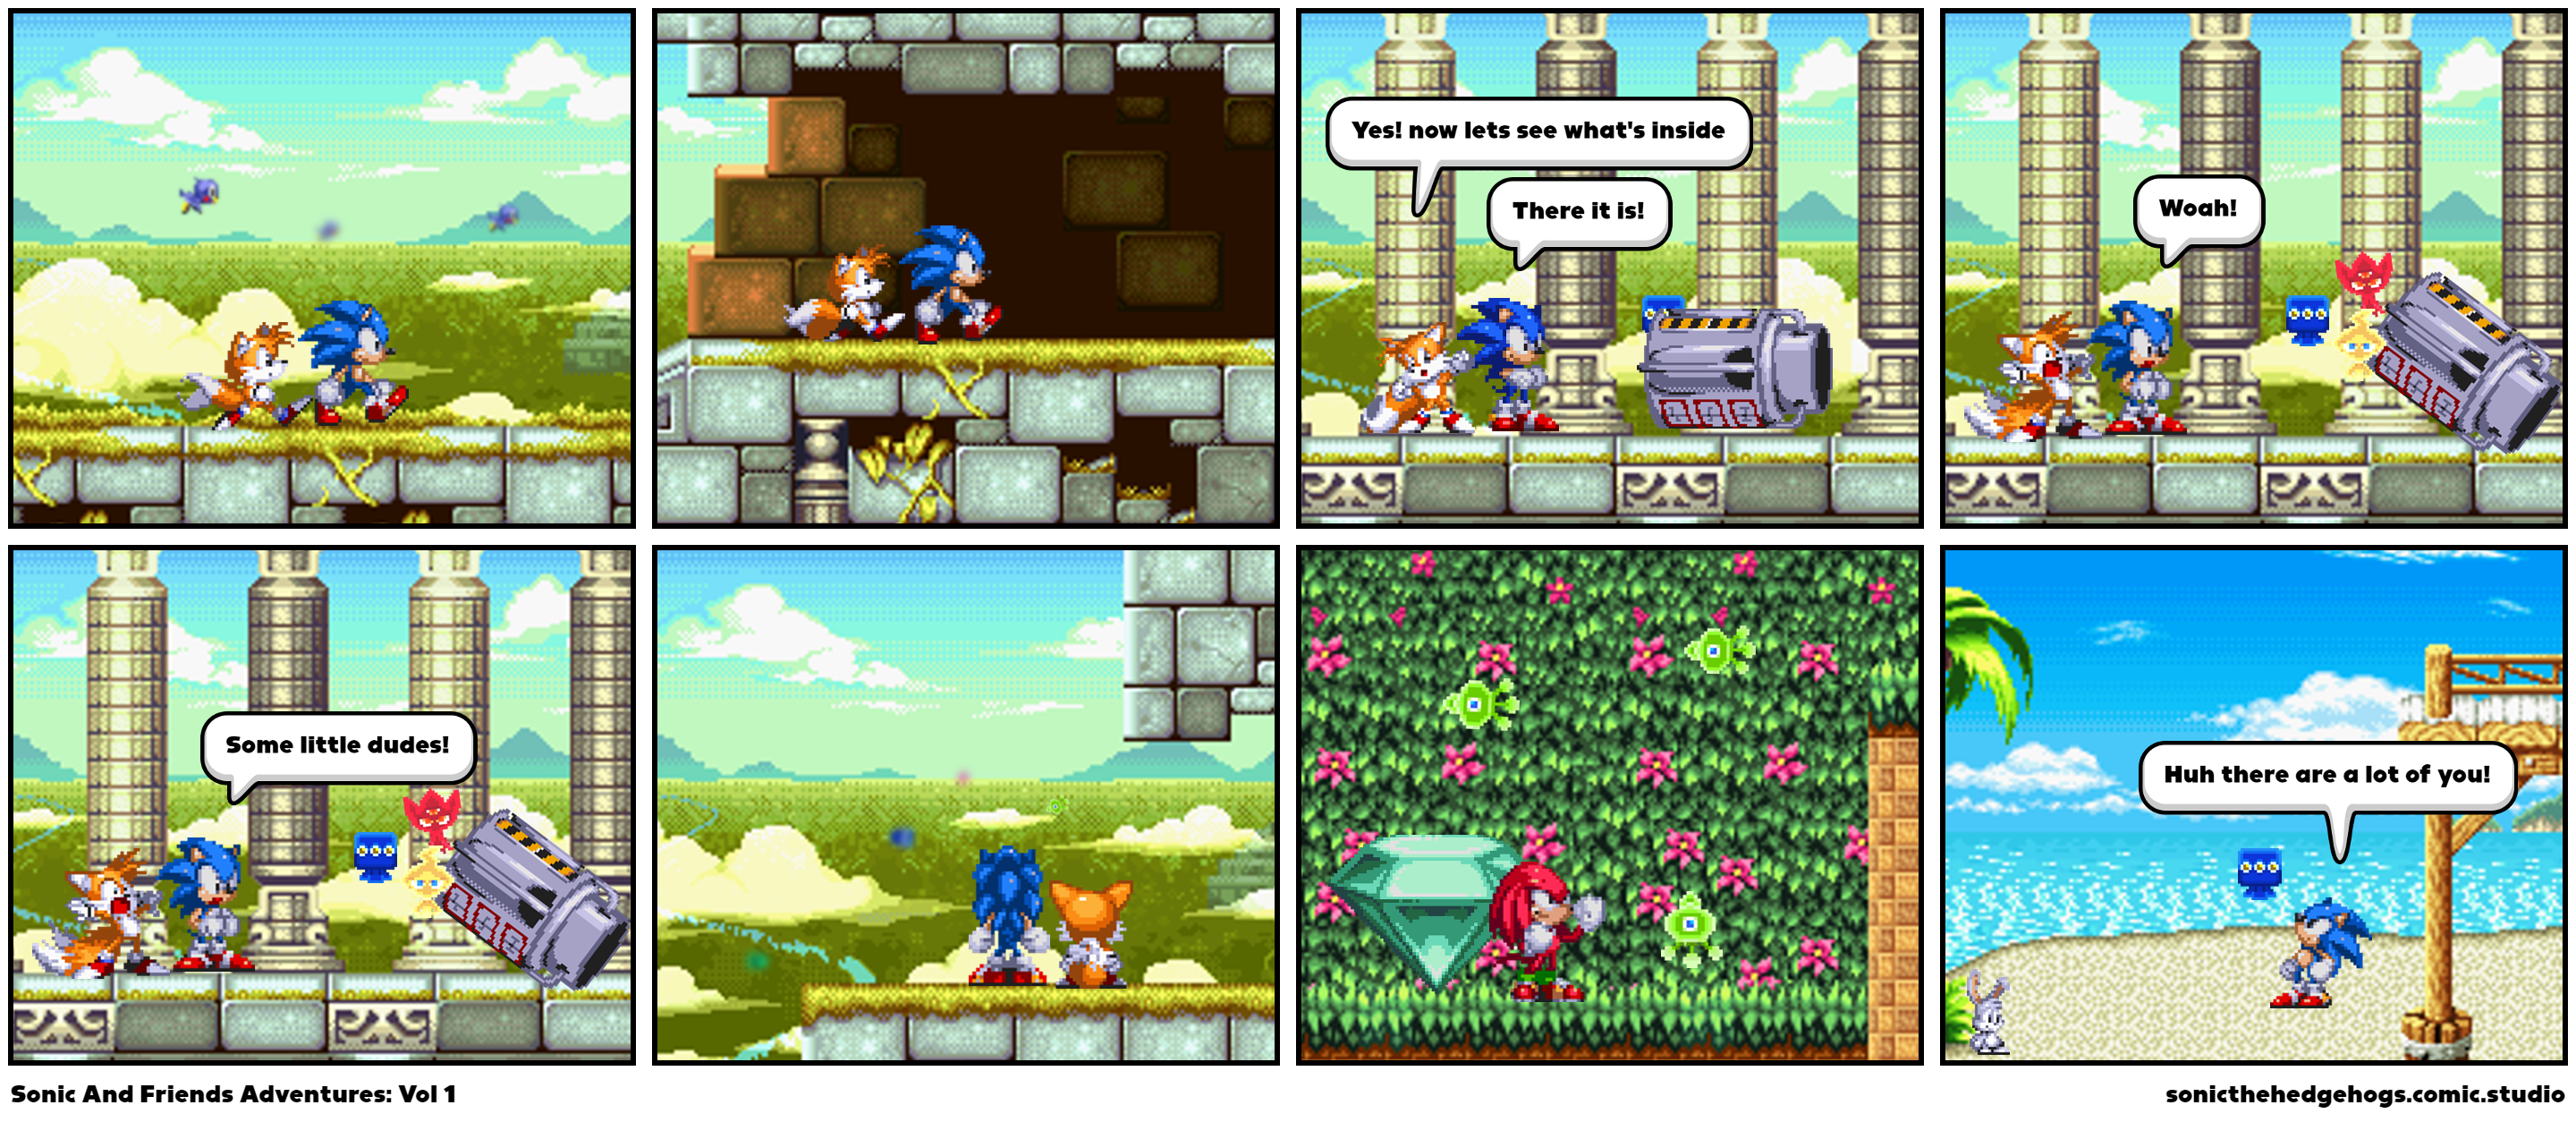 Sonic And Friends Adventures: Vol 1